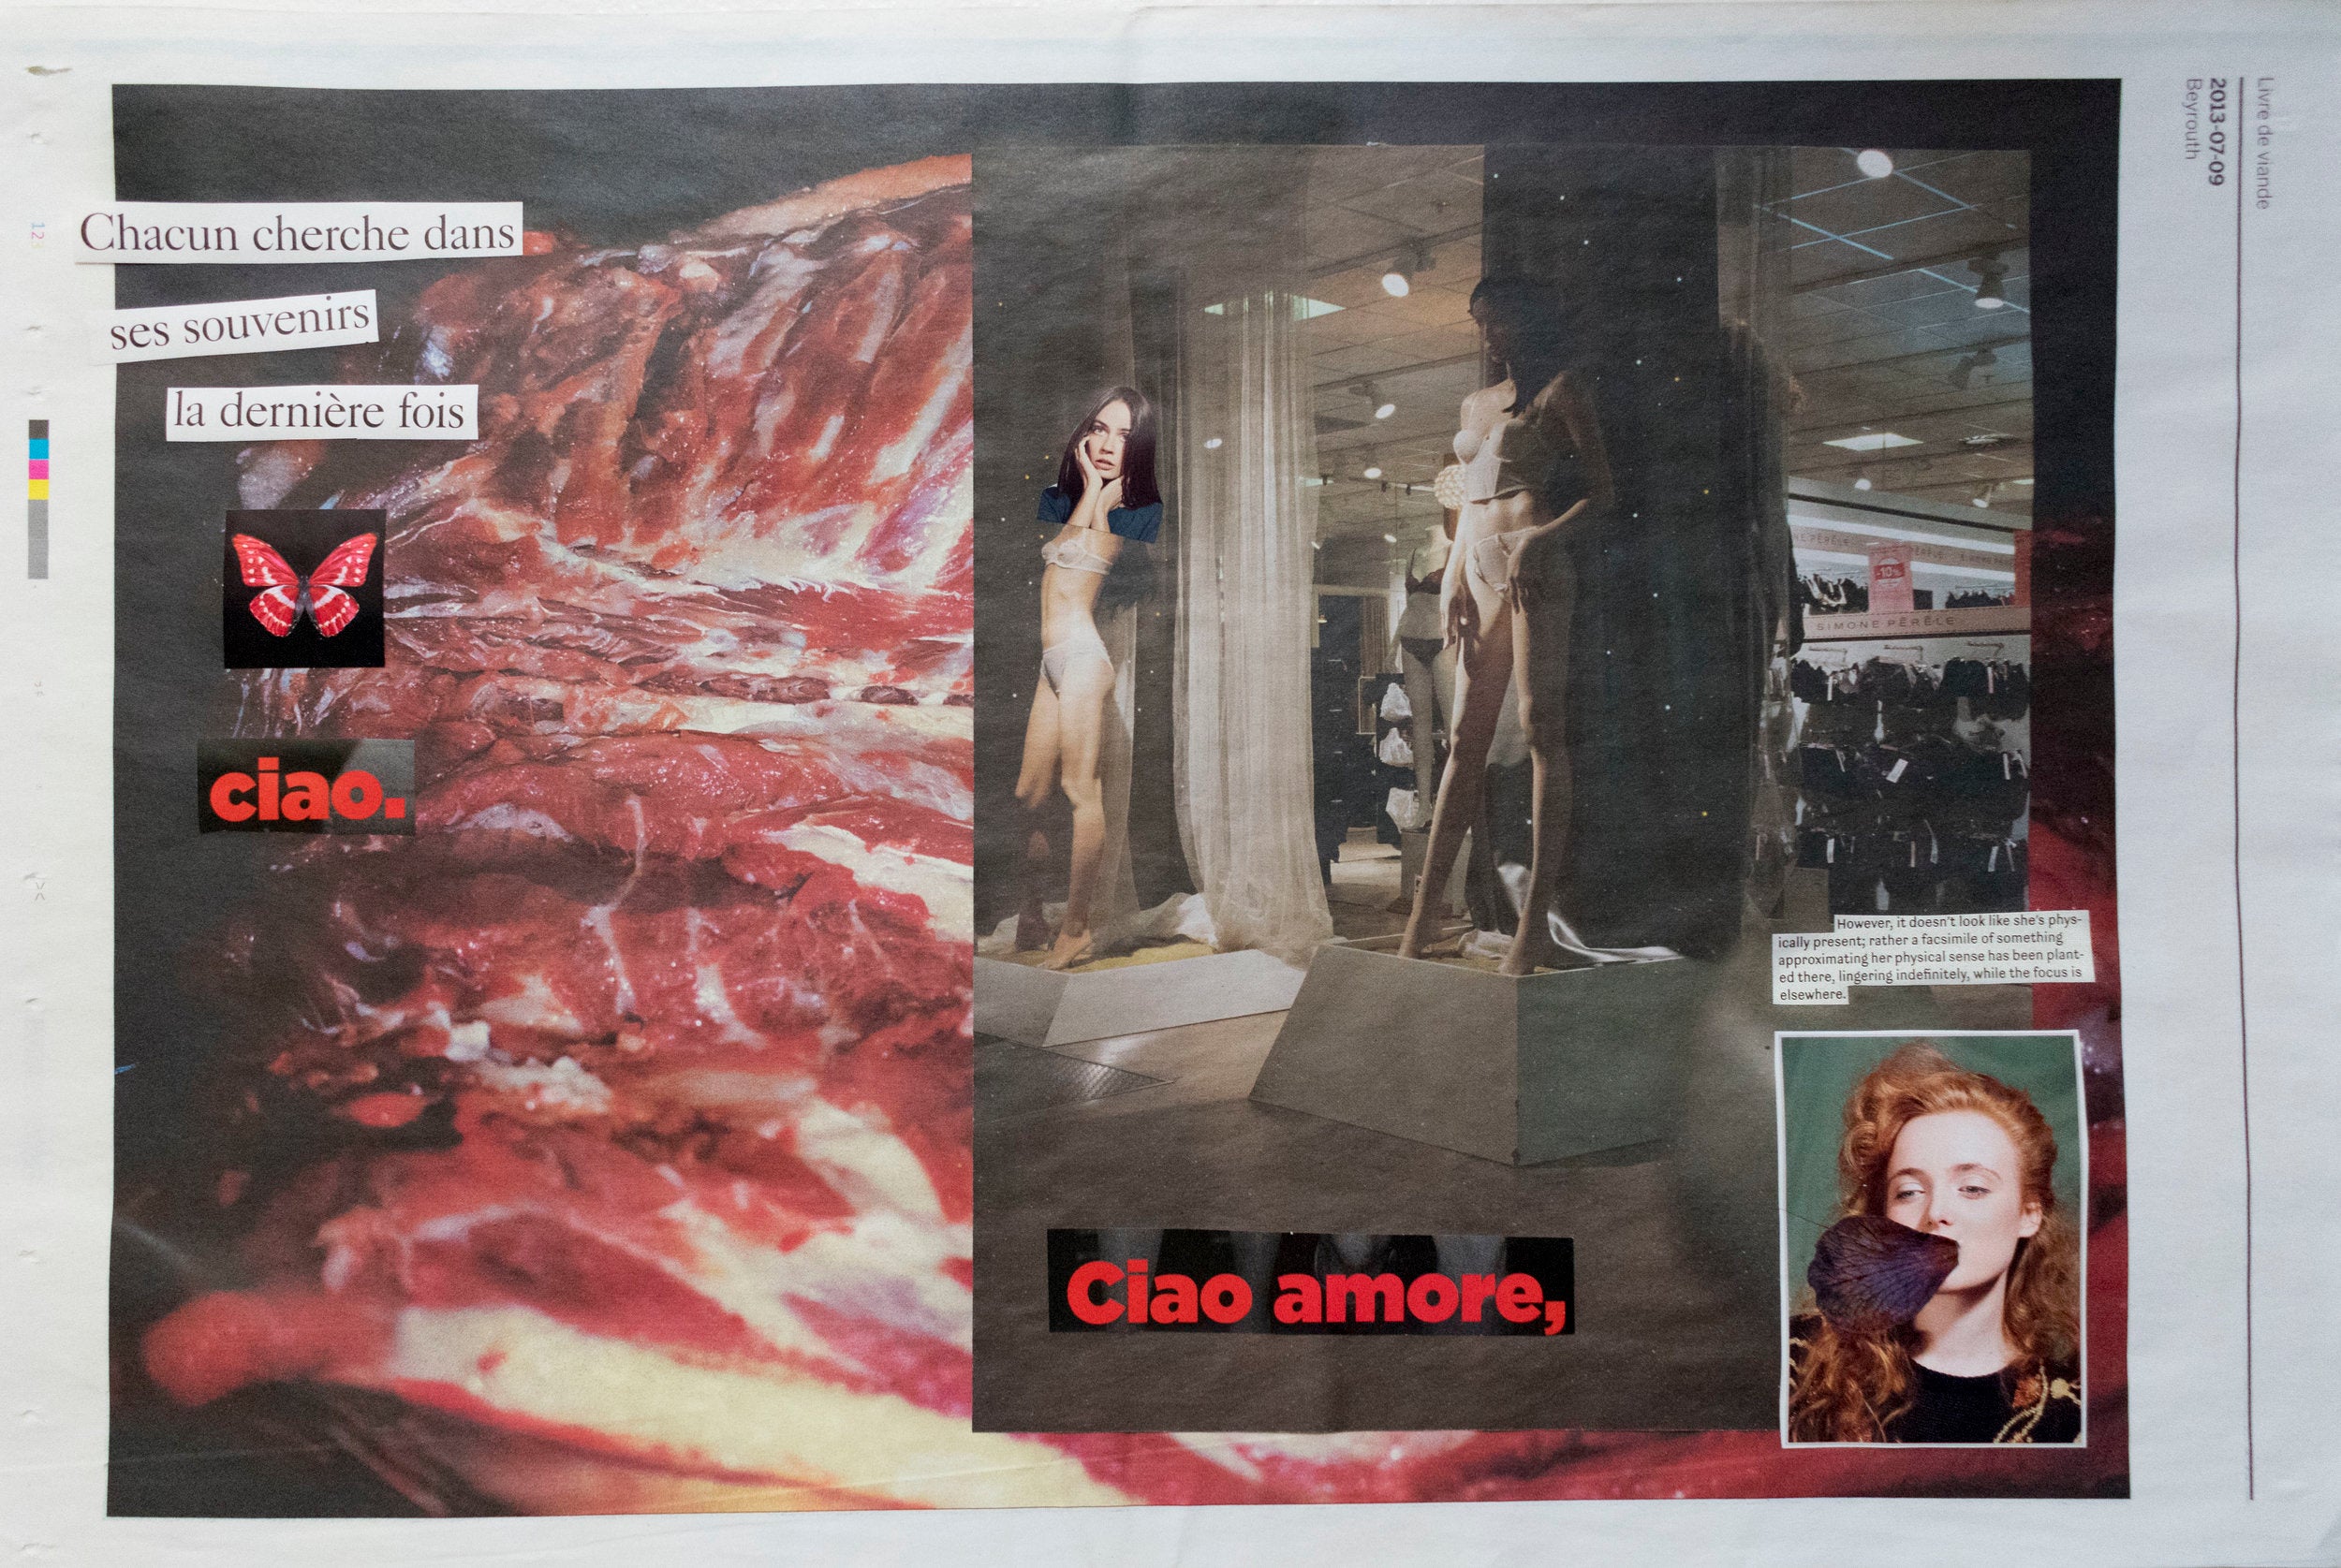 Collage. Close up photo of raw meat next to mannequins in lingerie. Magazine clippings read: "Chacun cherche dans" "ses souvenirs" "la dernière fois" "ciao." "Ciao amore," "However, it doesn't look like she's phys-ically present; rather a facsimile of something approximating her physical sense has been plant-ed there, lingering indefinitely, while the focus is elsewehere."